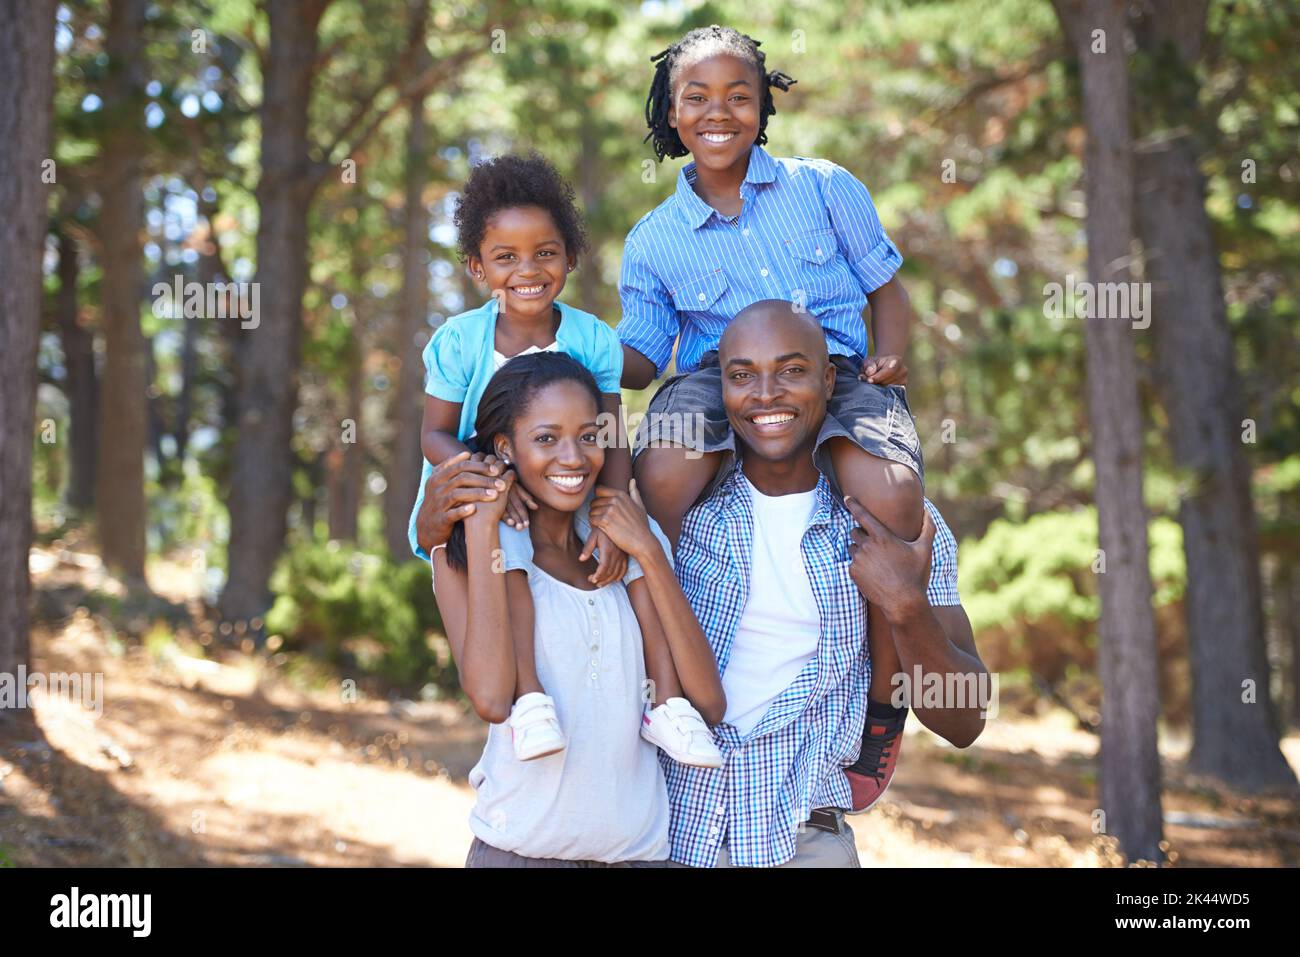 They share a love for nature. Portrait of a mother and father carrying their children on their shoulders while out for a hike. Stock Photo